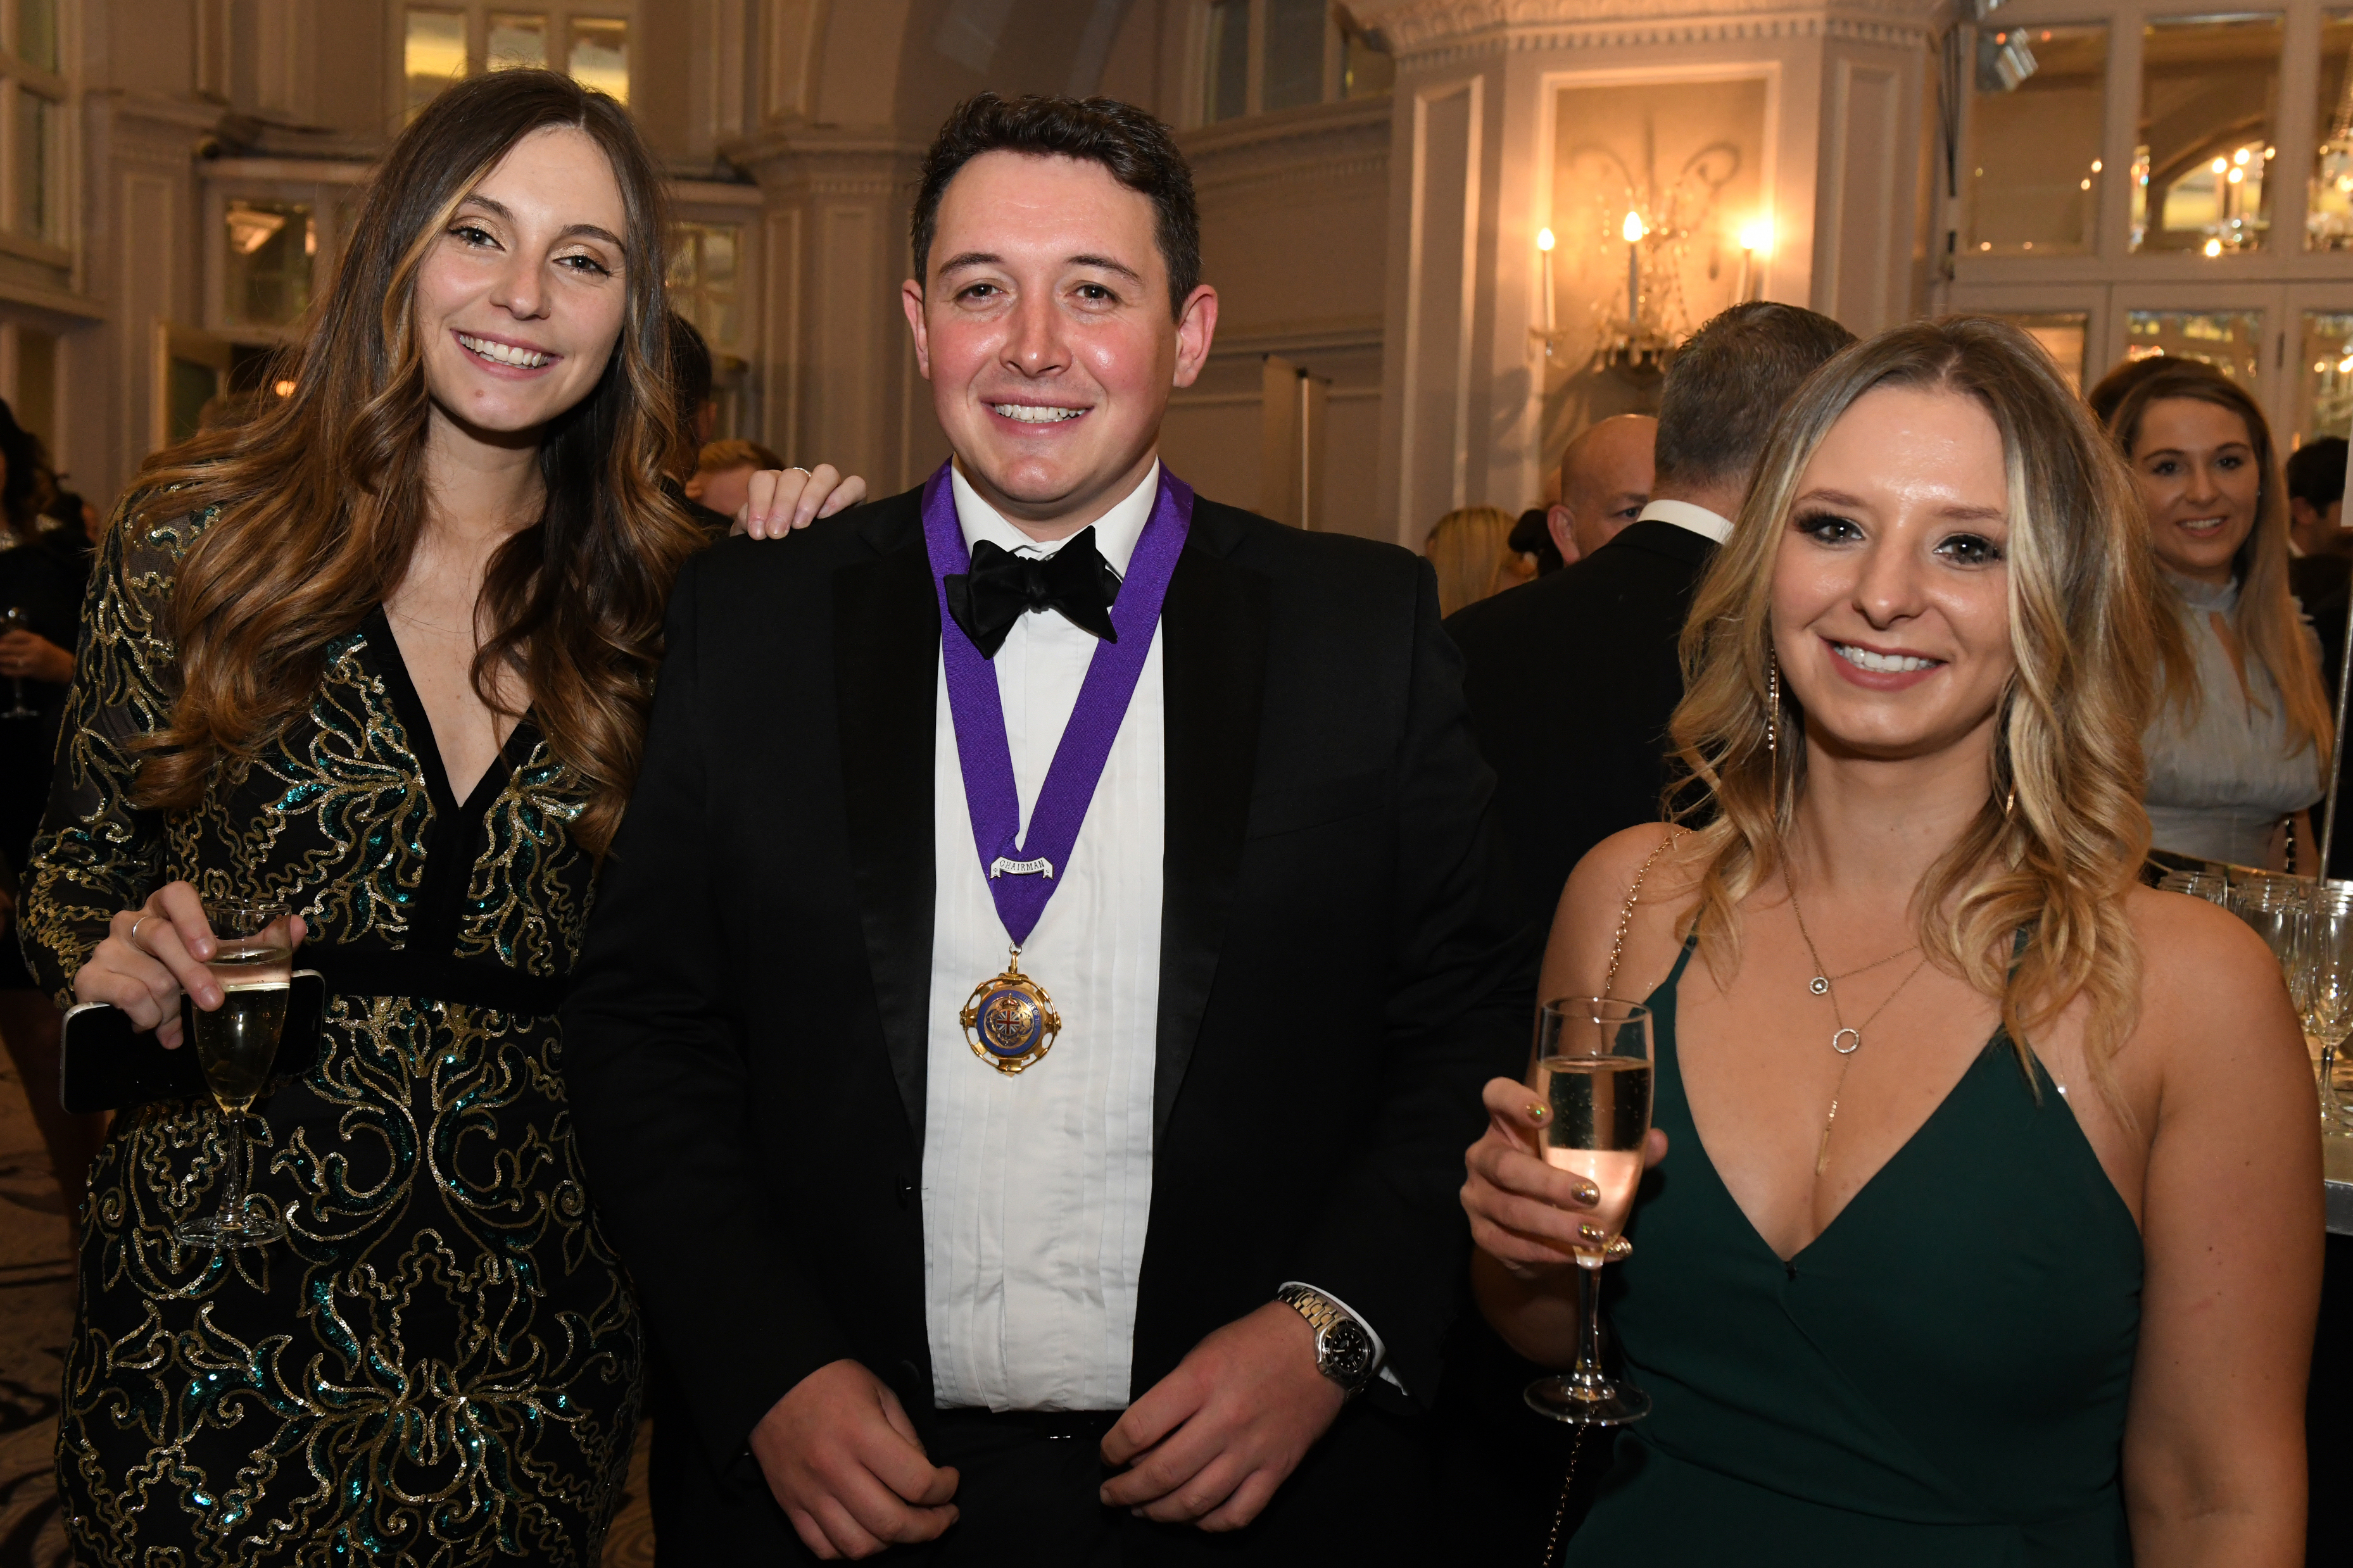 From left to right: Nicola Forest, chair of Matrics London, Theo Till, RICS Matrics chair and Mirona Tomala, RICS Young Surveyor of the year 2021 at YSOY dinner November 2021